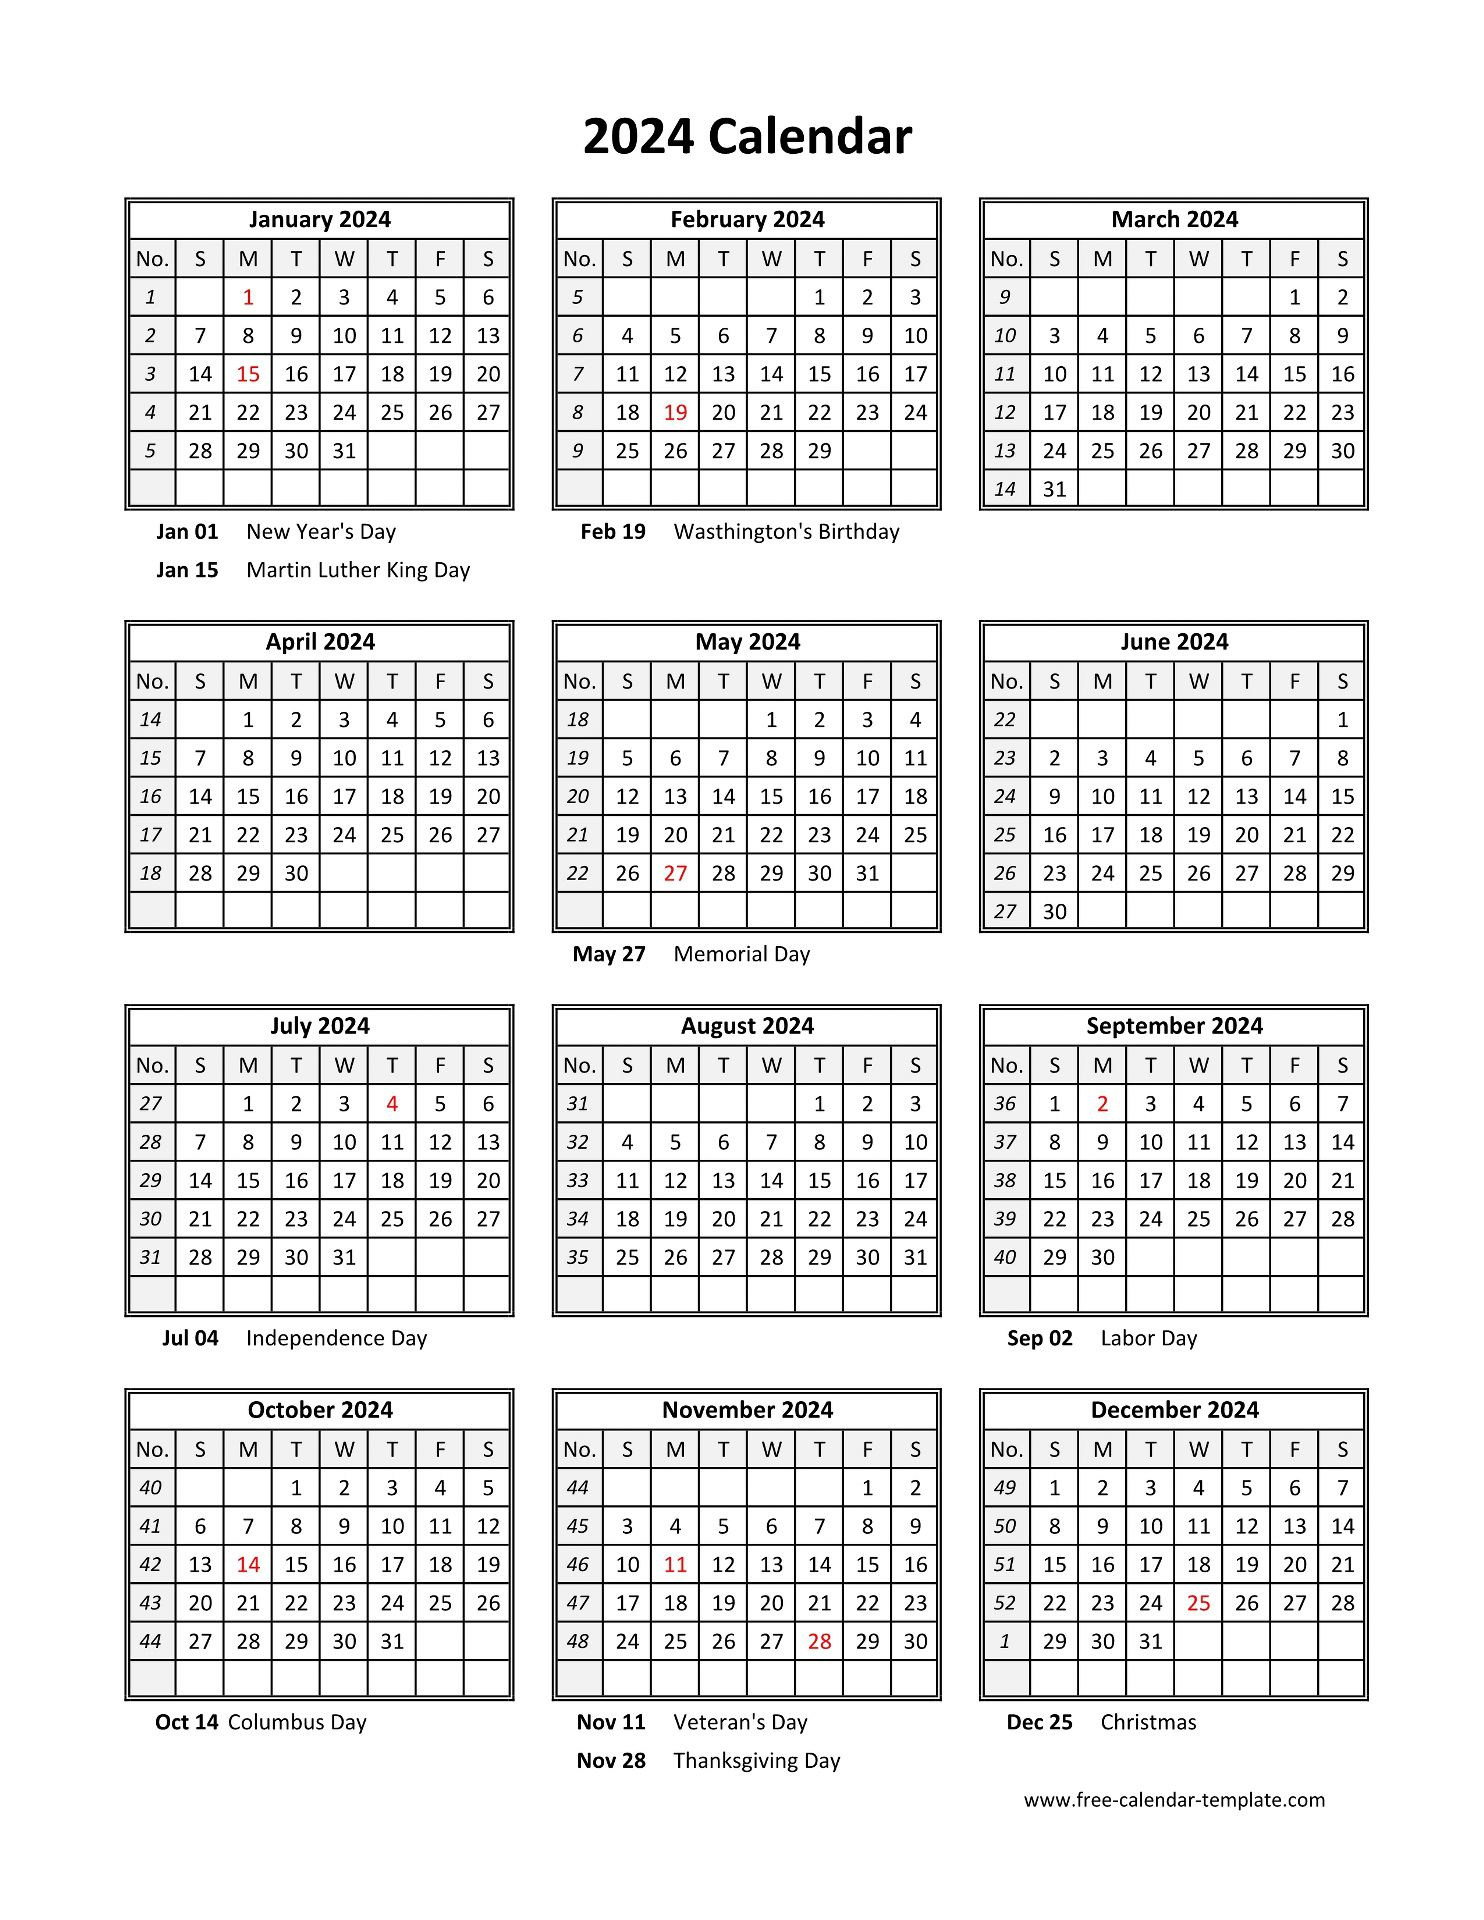 Yearly Printable Calendar 2024 With Holidays | Free-Calendar | Printable Calendar 2024 Yearly